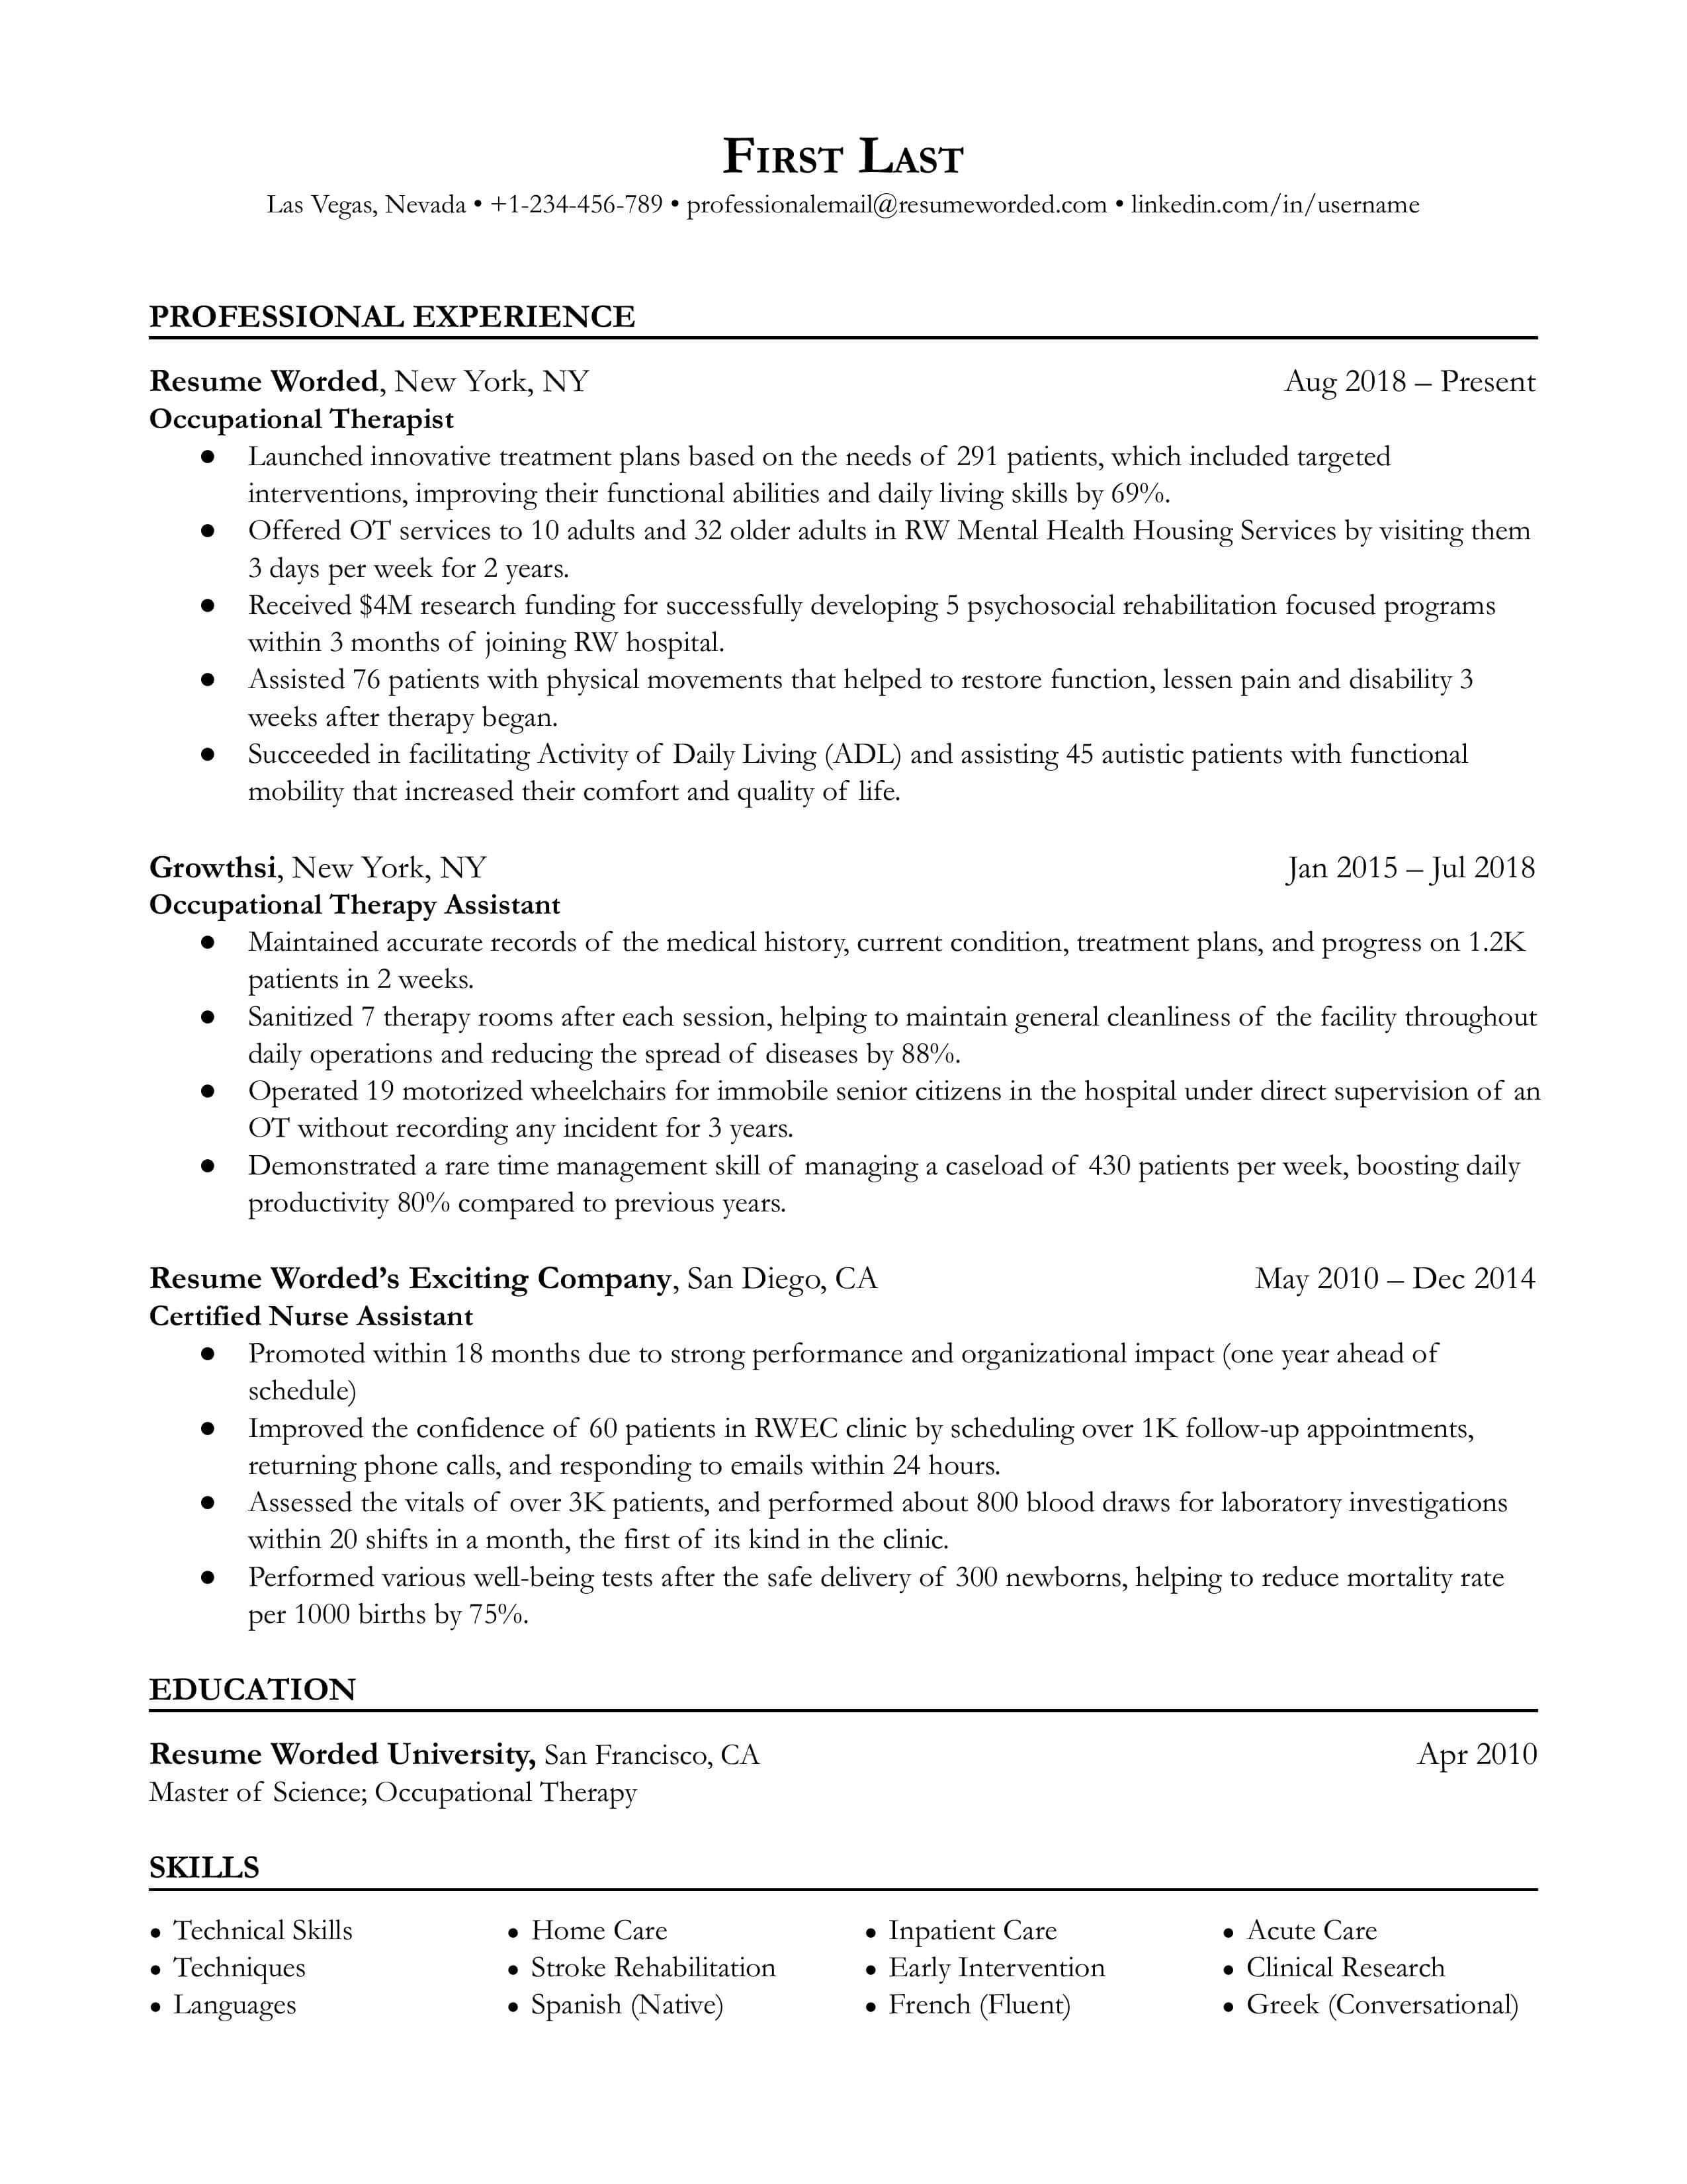 An occupational therapist resume sample that highlights the applicant’s career progression and impressive hard skills.